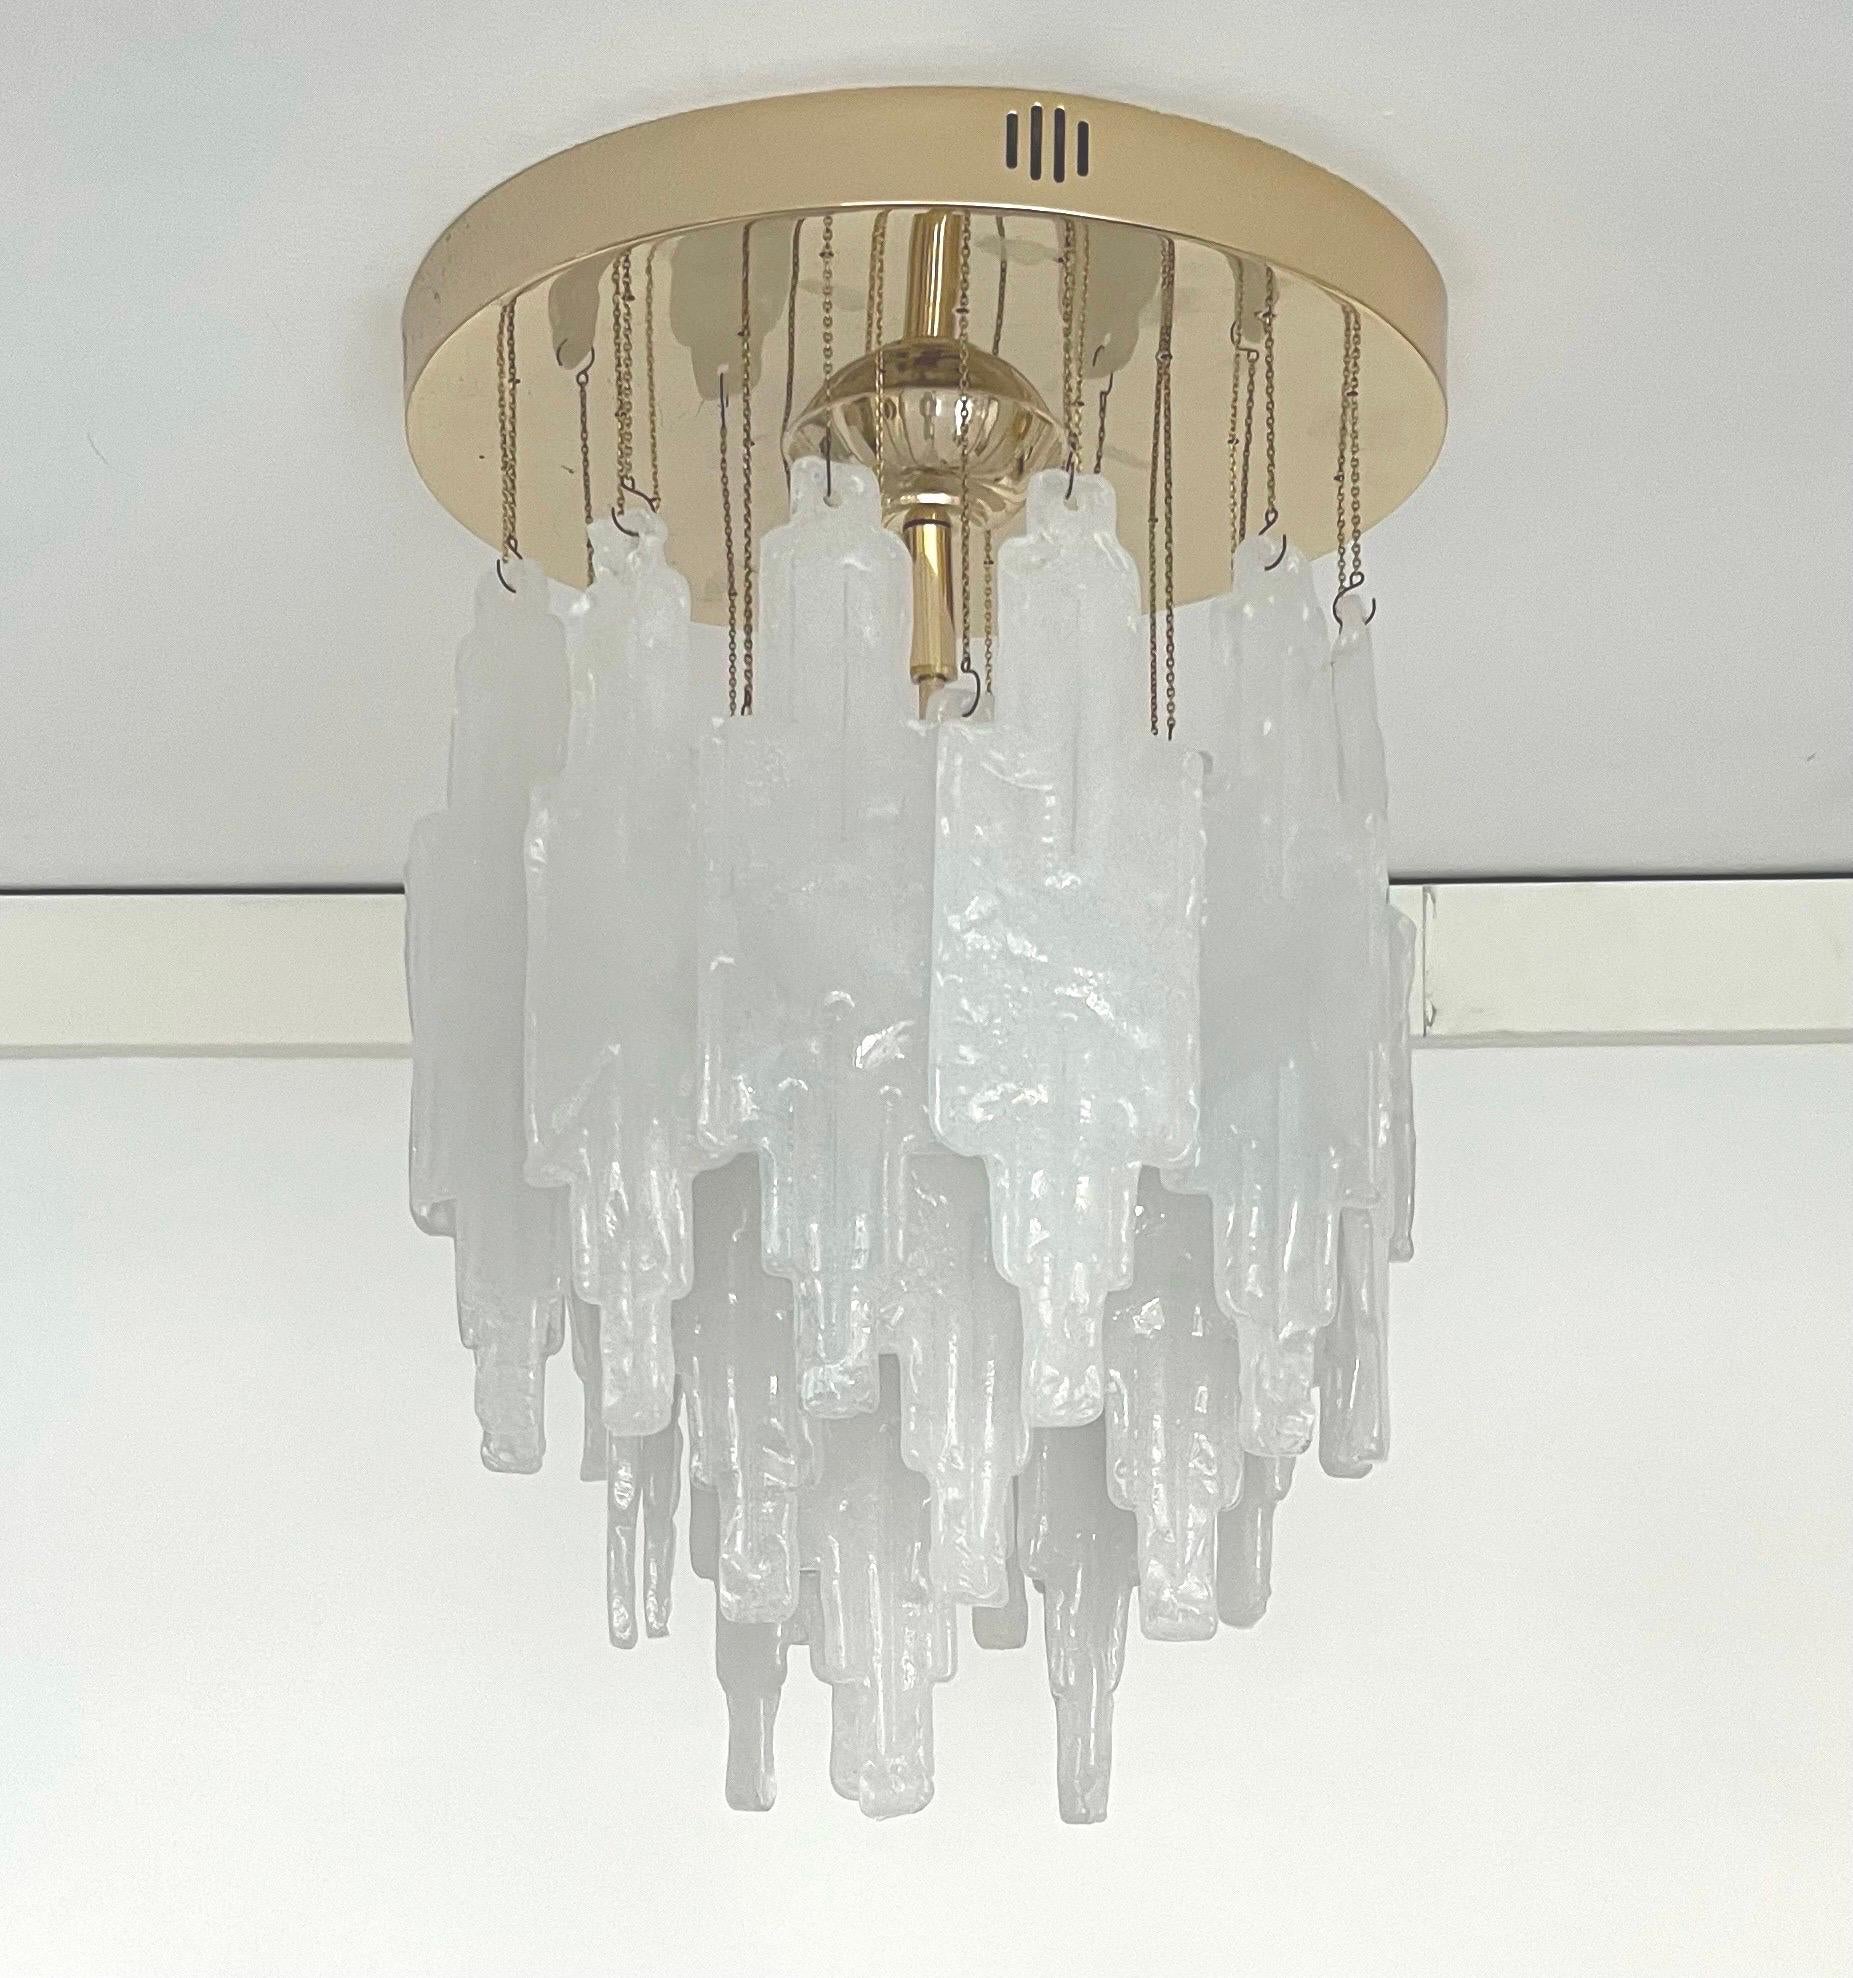 Beauty and stunning snow white colorMurano glass Chandelier by Poliarte. This Chandelier was designed and manufactured during the 1970s in Italy. 
This Chandelier is composed by 28 units of Murano glasses and brass structure. One more Murano glass